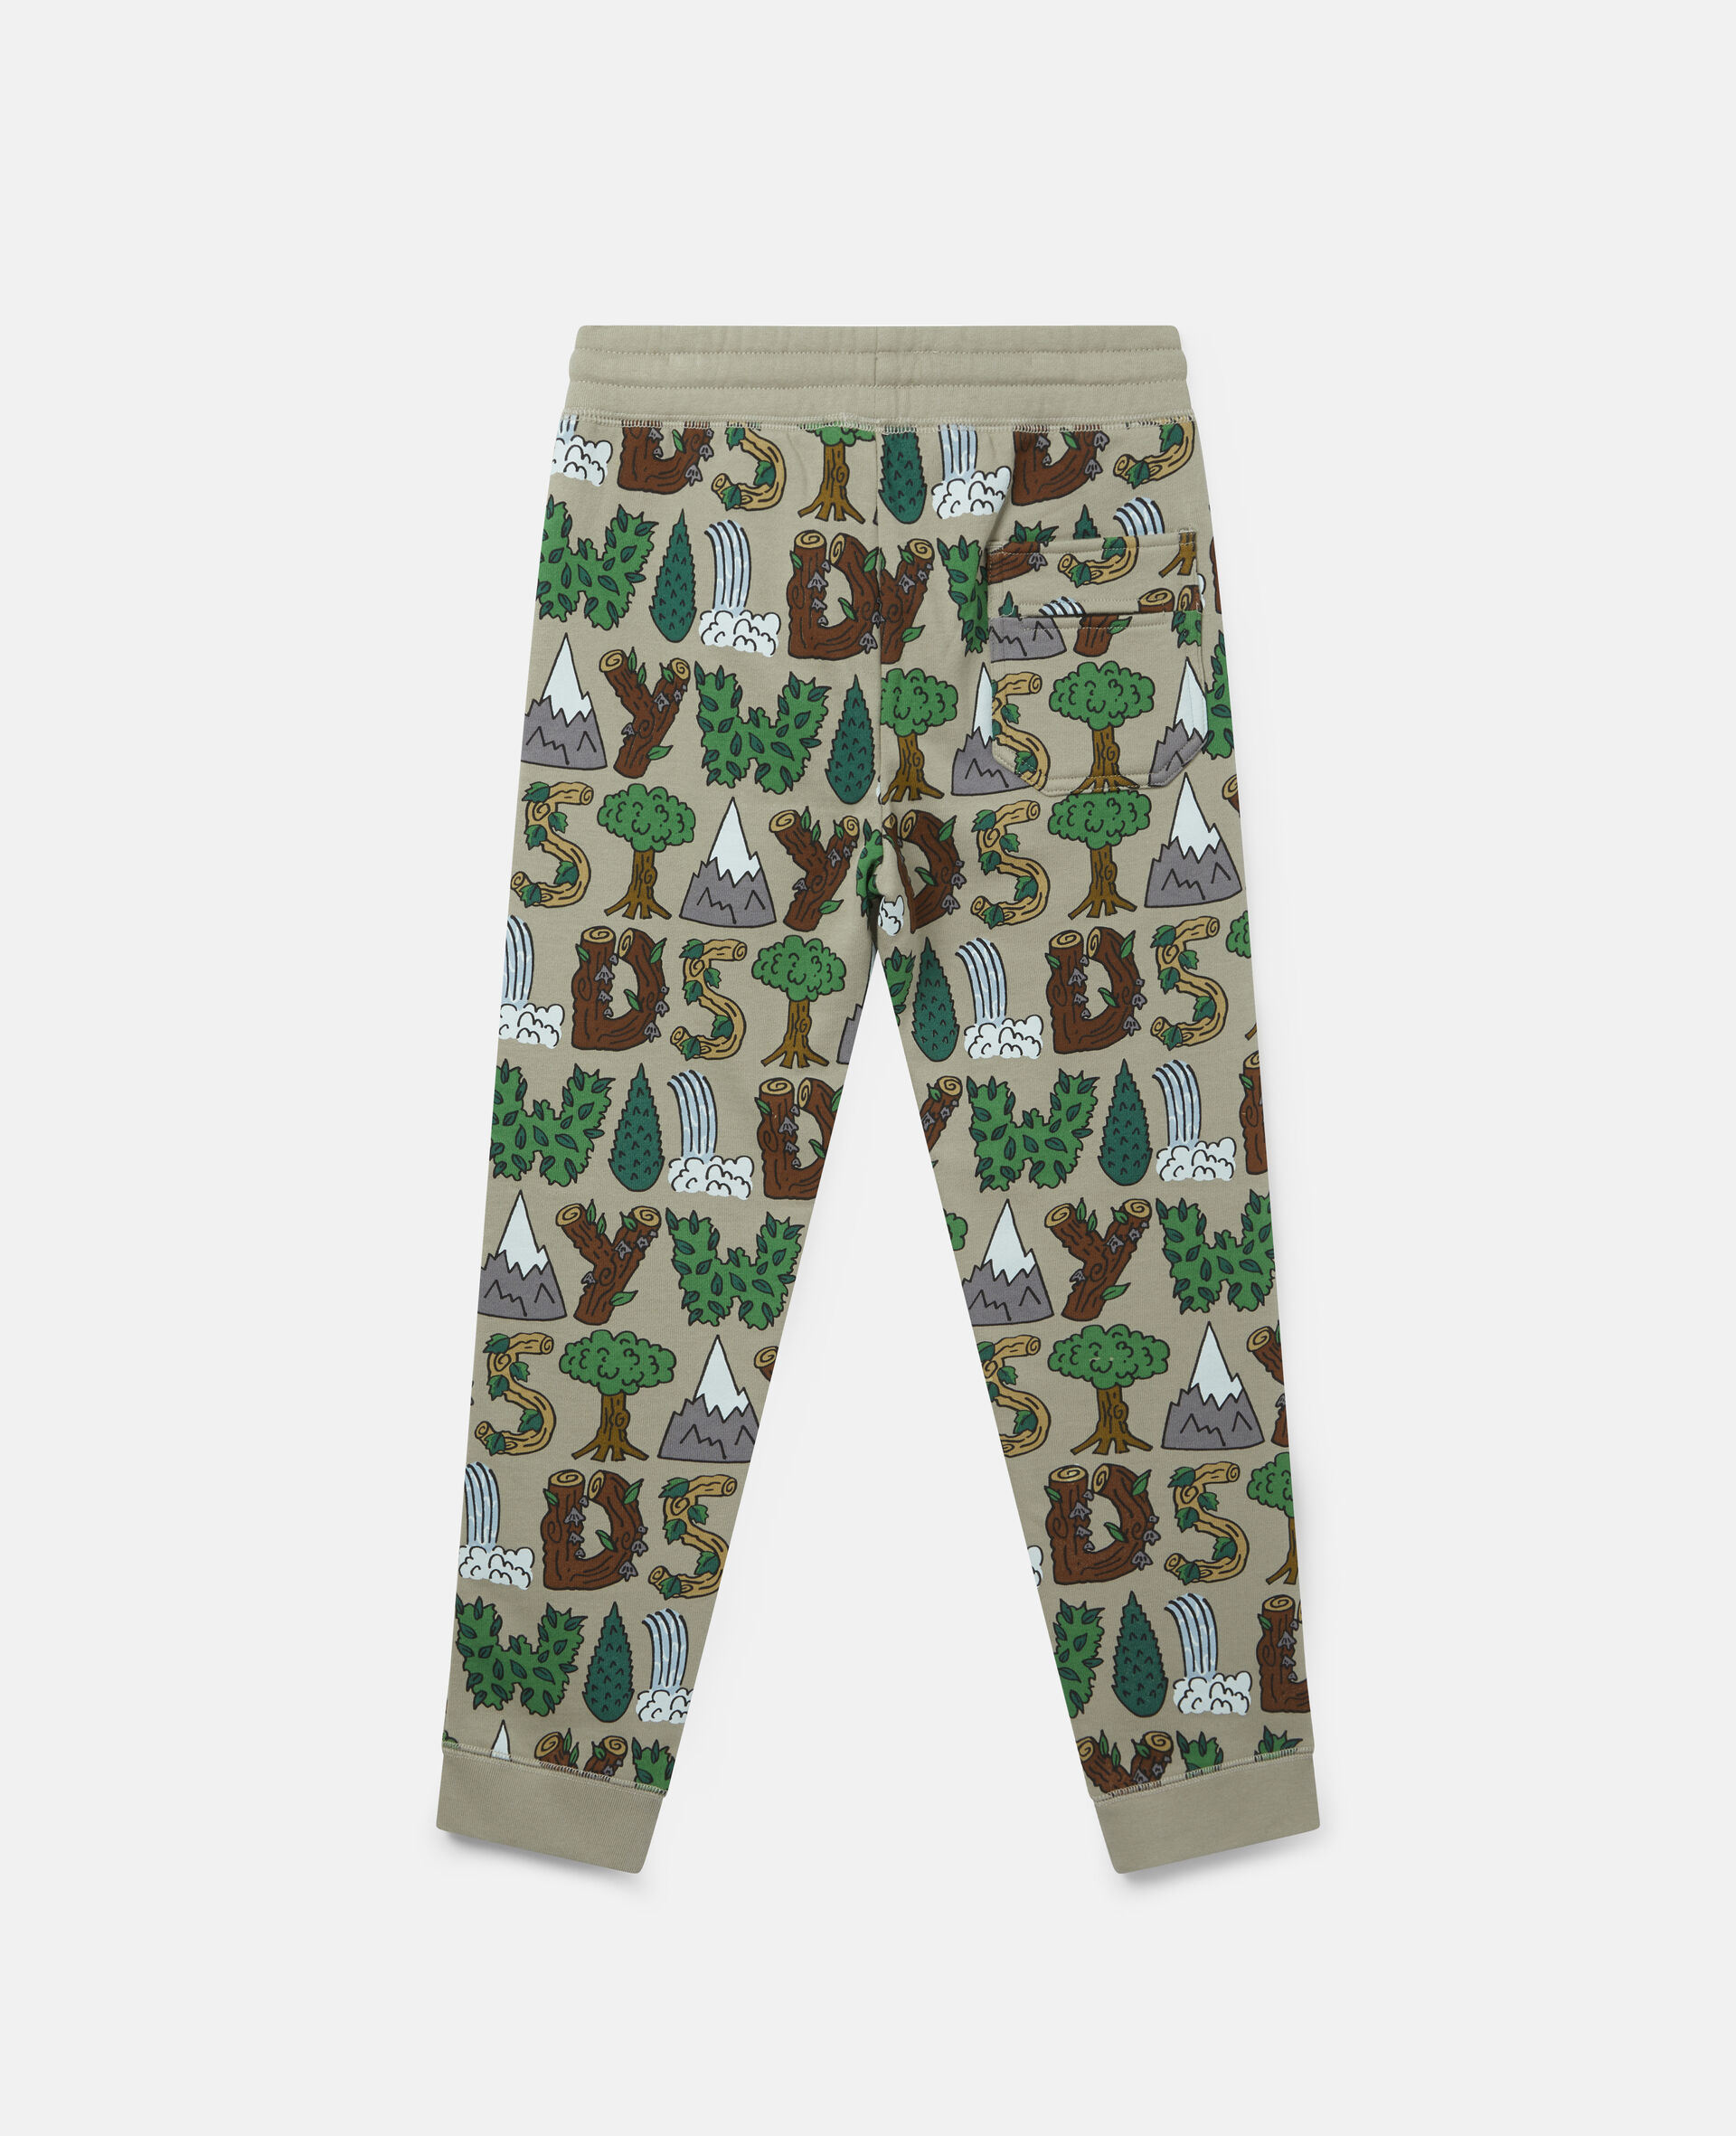 'Stay Wild' Fleece Joggers-Multicolour-large image number 3